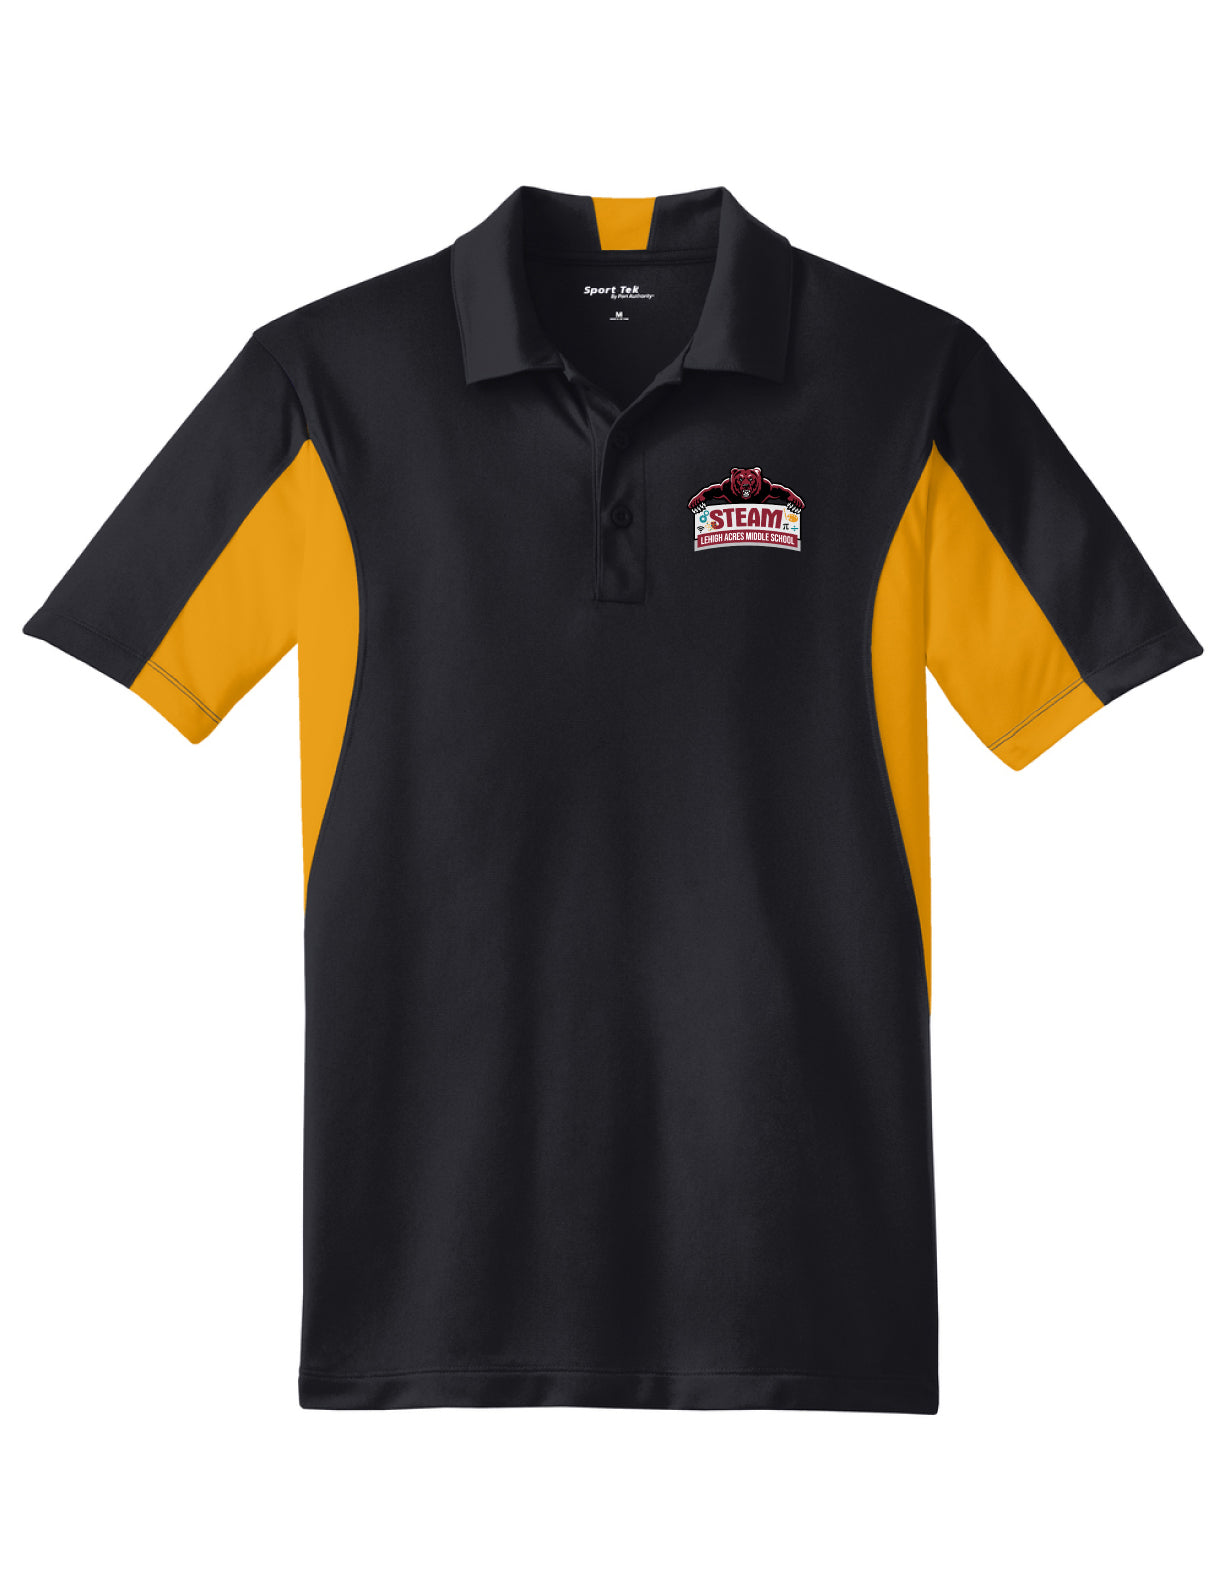 Polo Shirt Black with Gold Trim (Unisex Adult Cut)